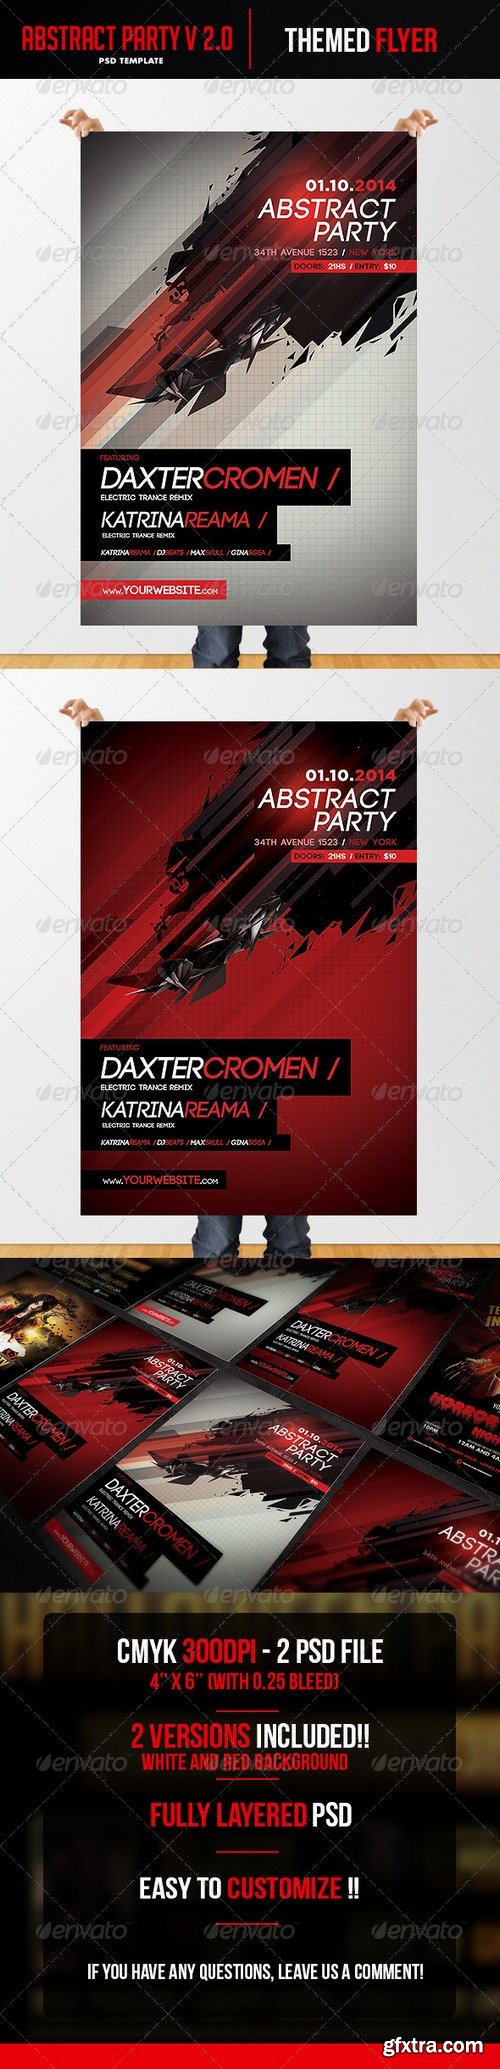 Graphicriver - Abstract V2 Flyer Template 6075993